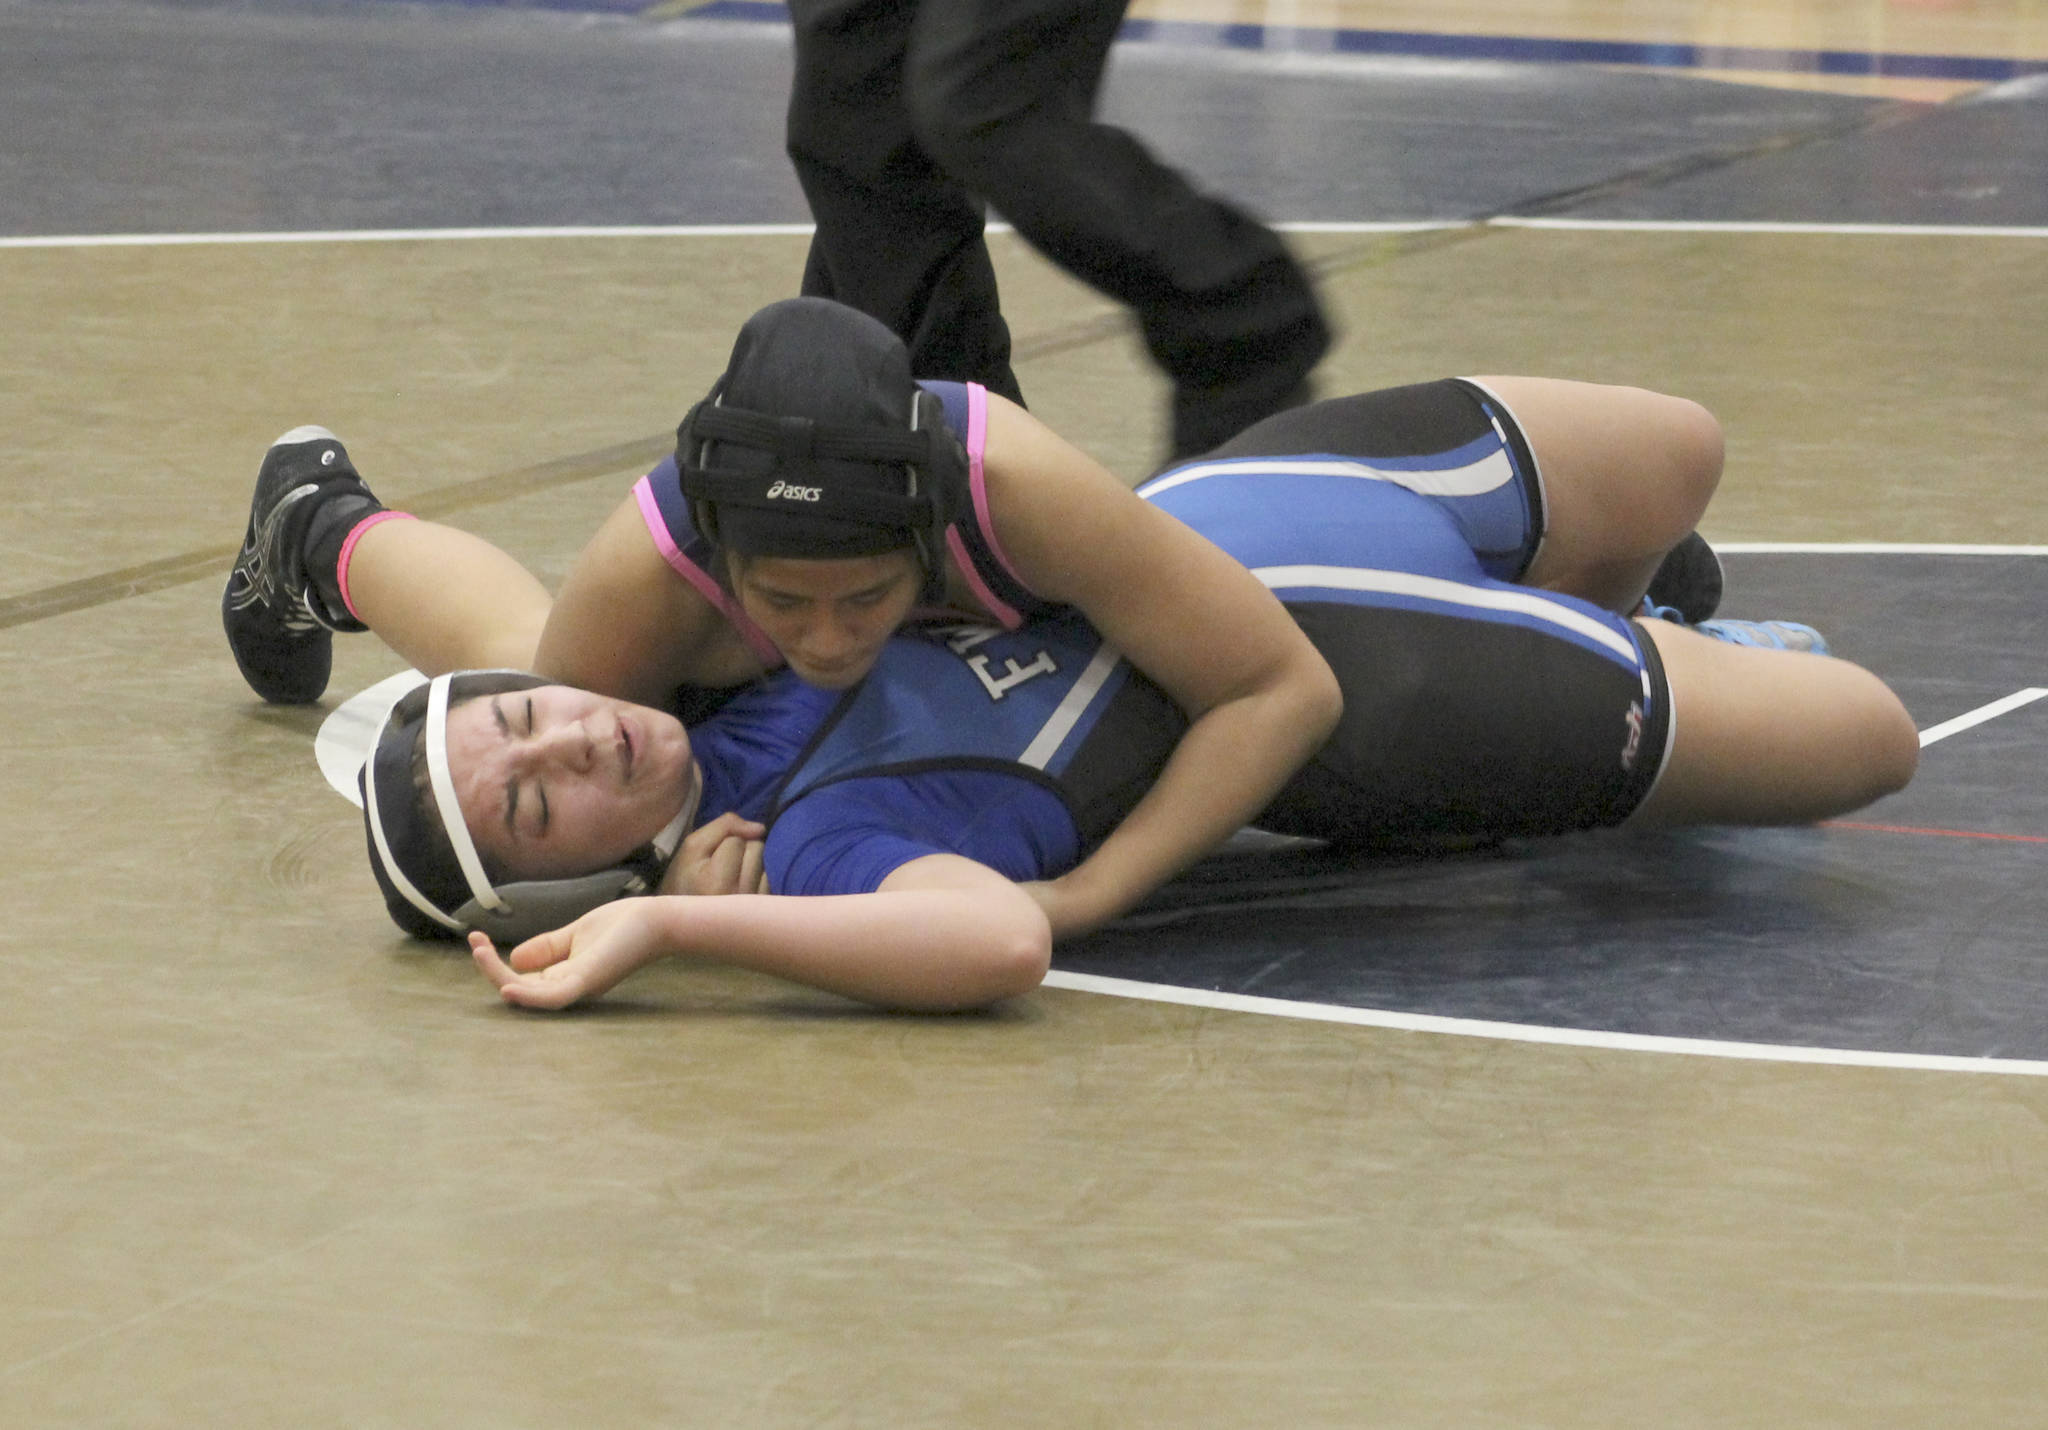 Federal Way girls wrestling program celebrated at all-city meet ...